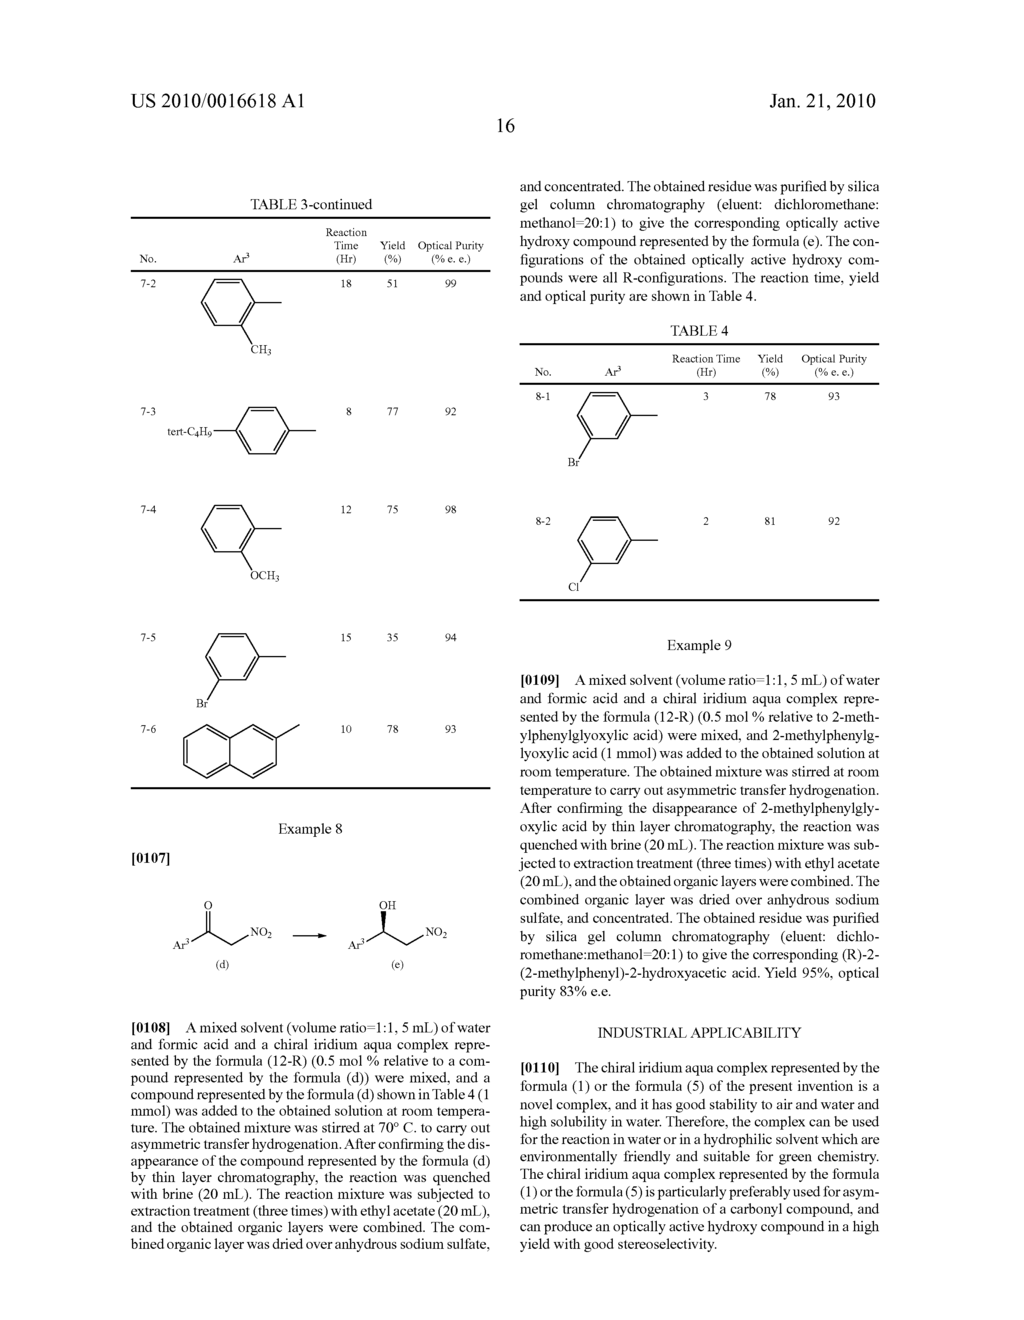 CHIRAL IRIDIUM AQUA COMPLEX AND METHOD FOR PRODUCING OPTICALLY ACTIVE HYDROXY COMPOUND BY USING THE SAME - diagram, schematic, and image 17